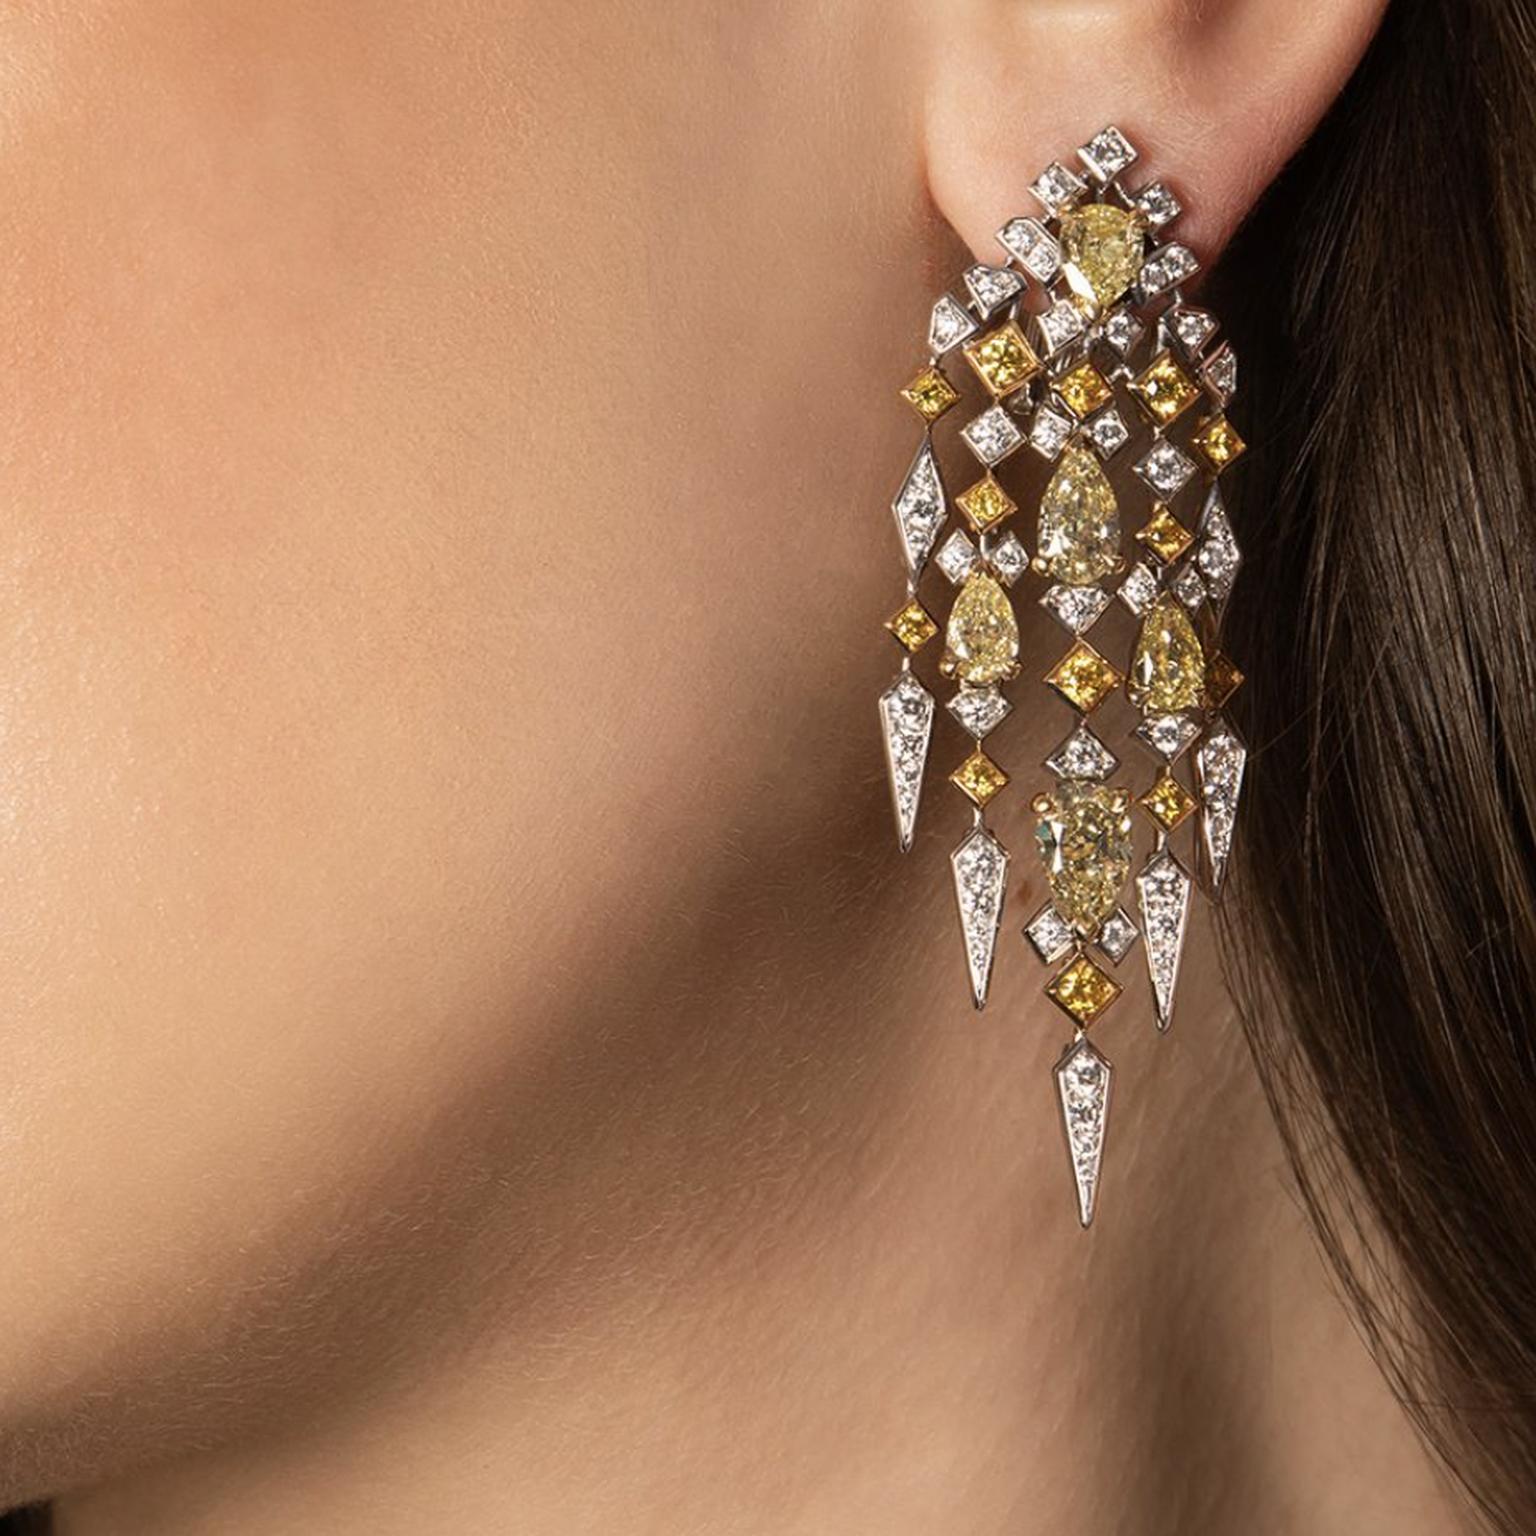 Yellow and white diamond earrings by David Morris on model